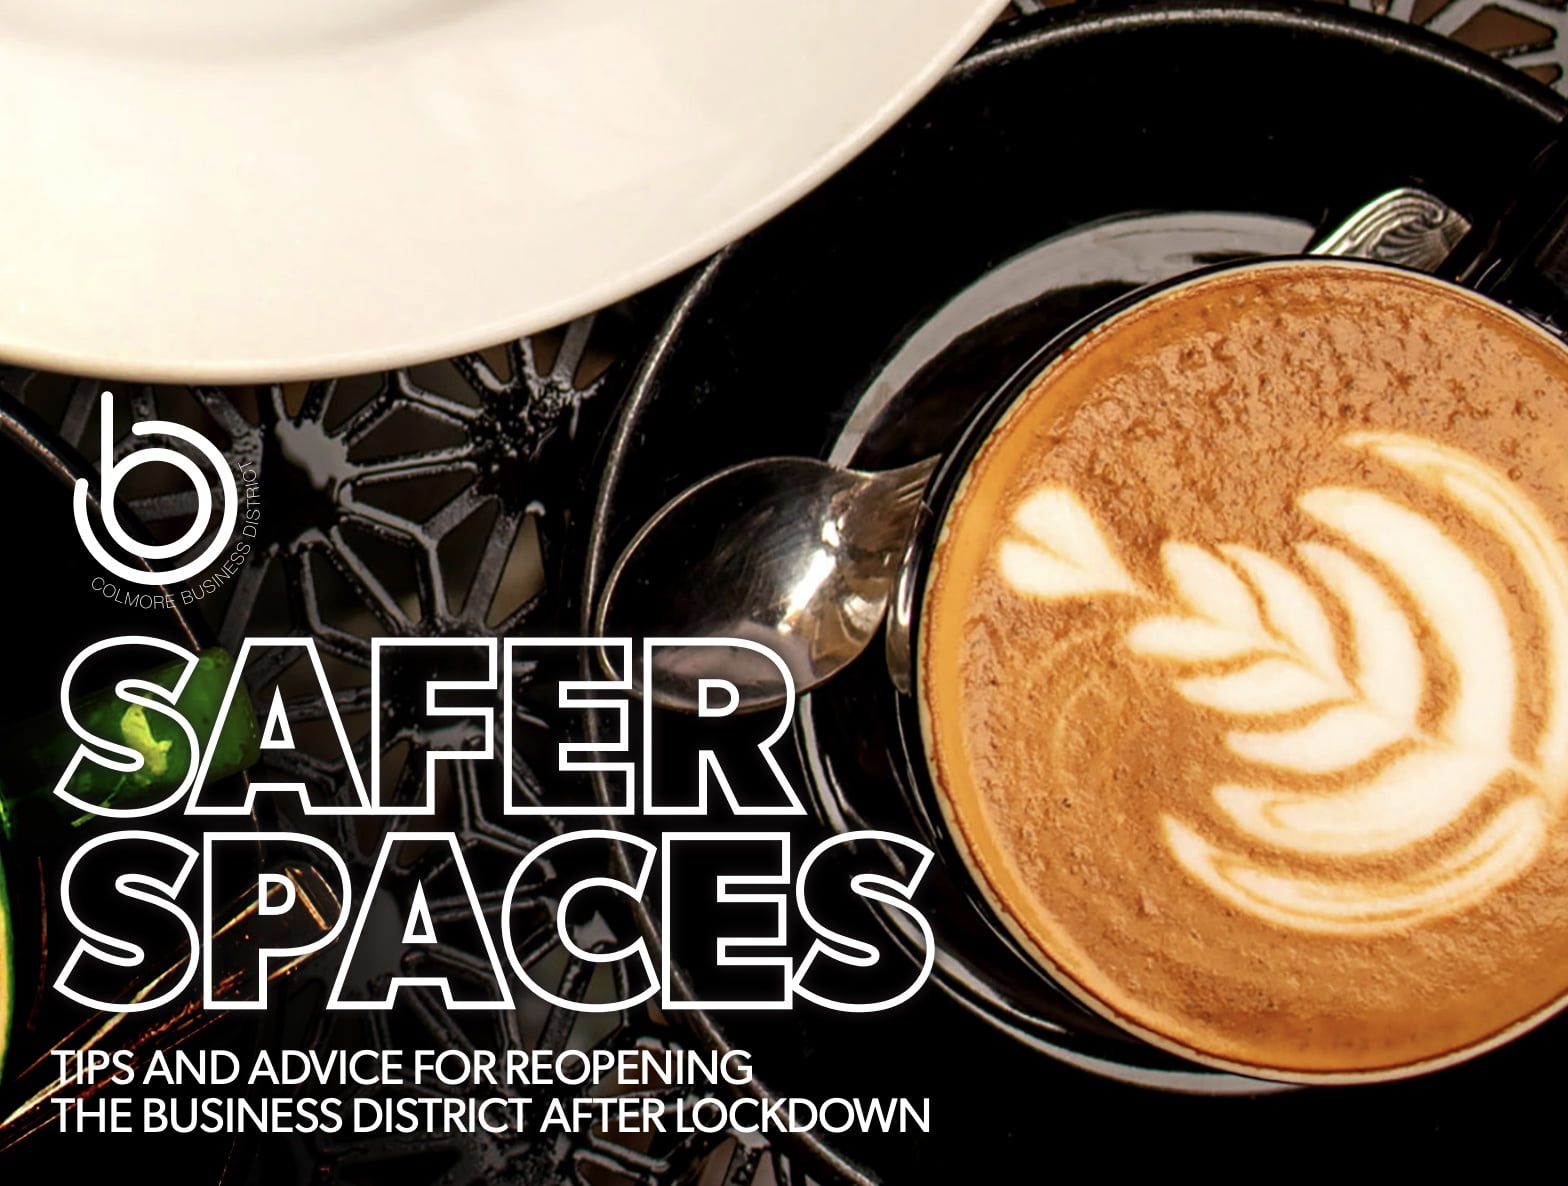 Safer Spaces Guide Hospitality Edition Summer 2020 Publications